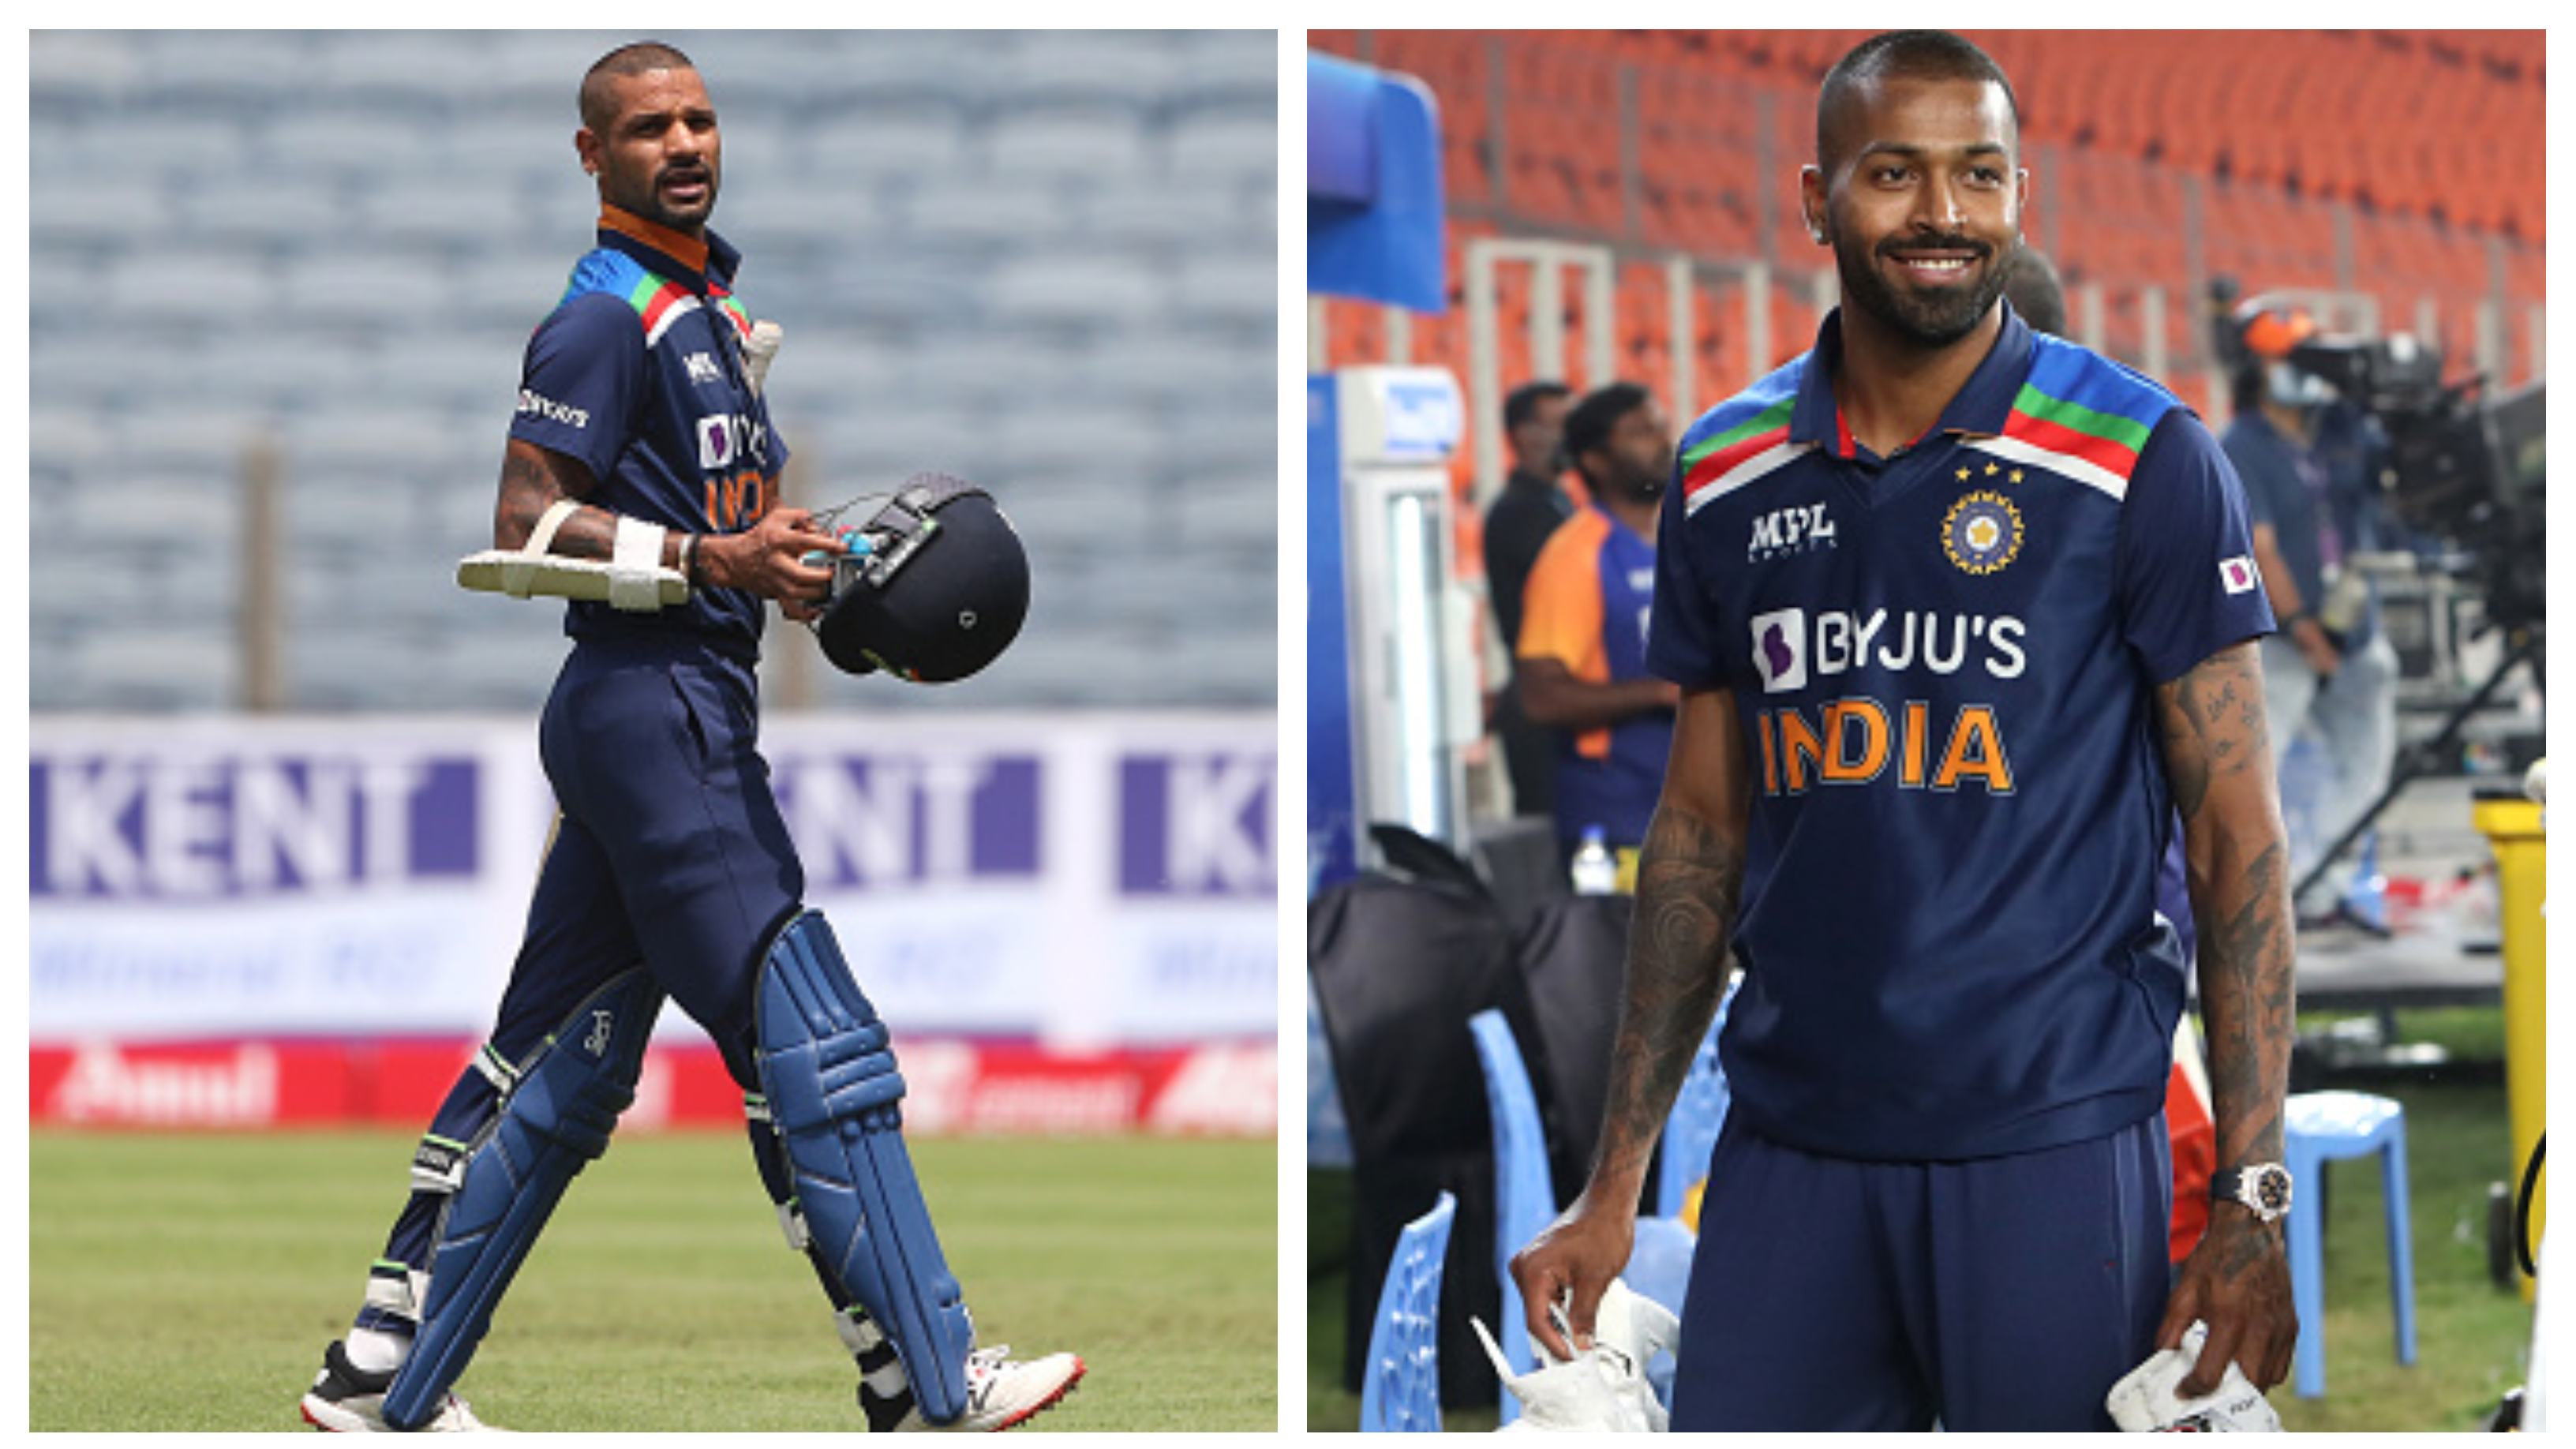 SL v IND 2021: Shikhar Dhawan, Hardik Pandya likely to compete for India captaincy – Report